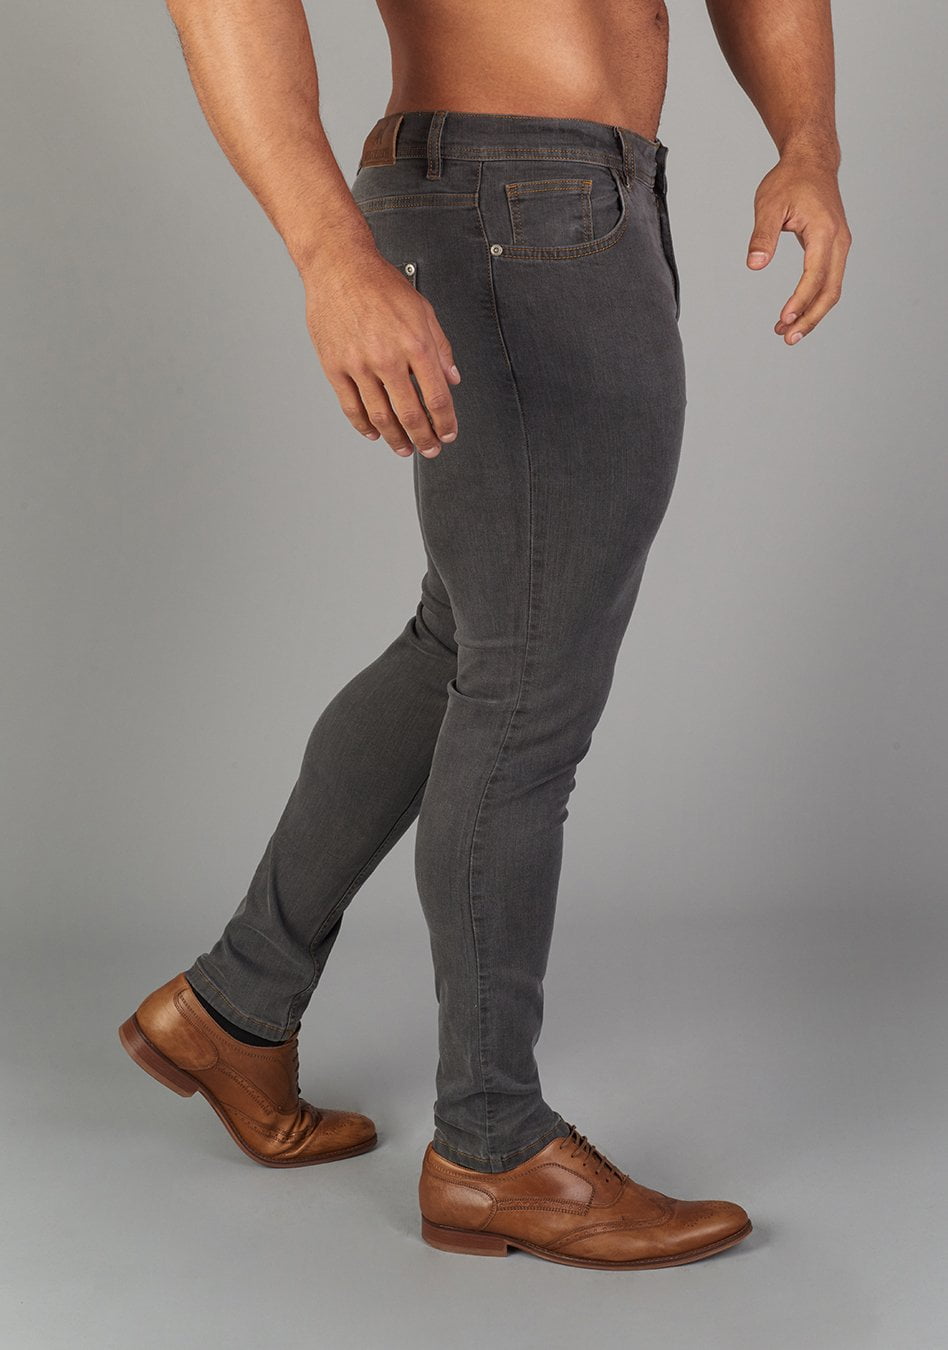 Grey Athletic Fit Jeans - Rhino Oxcloth